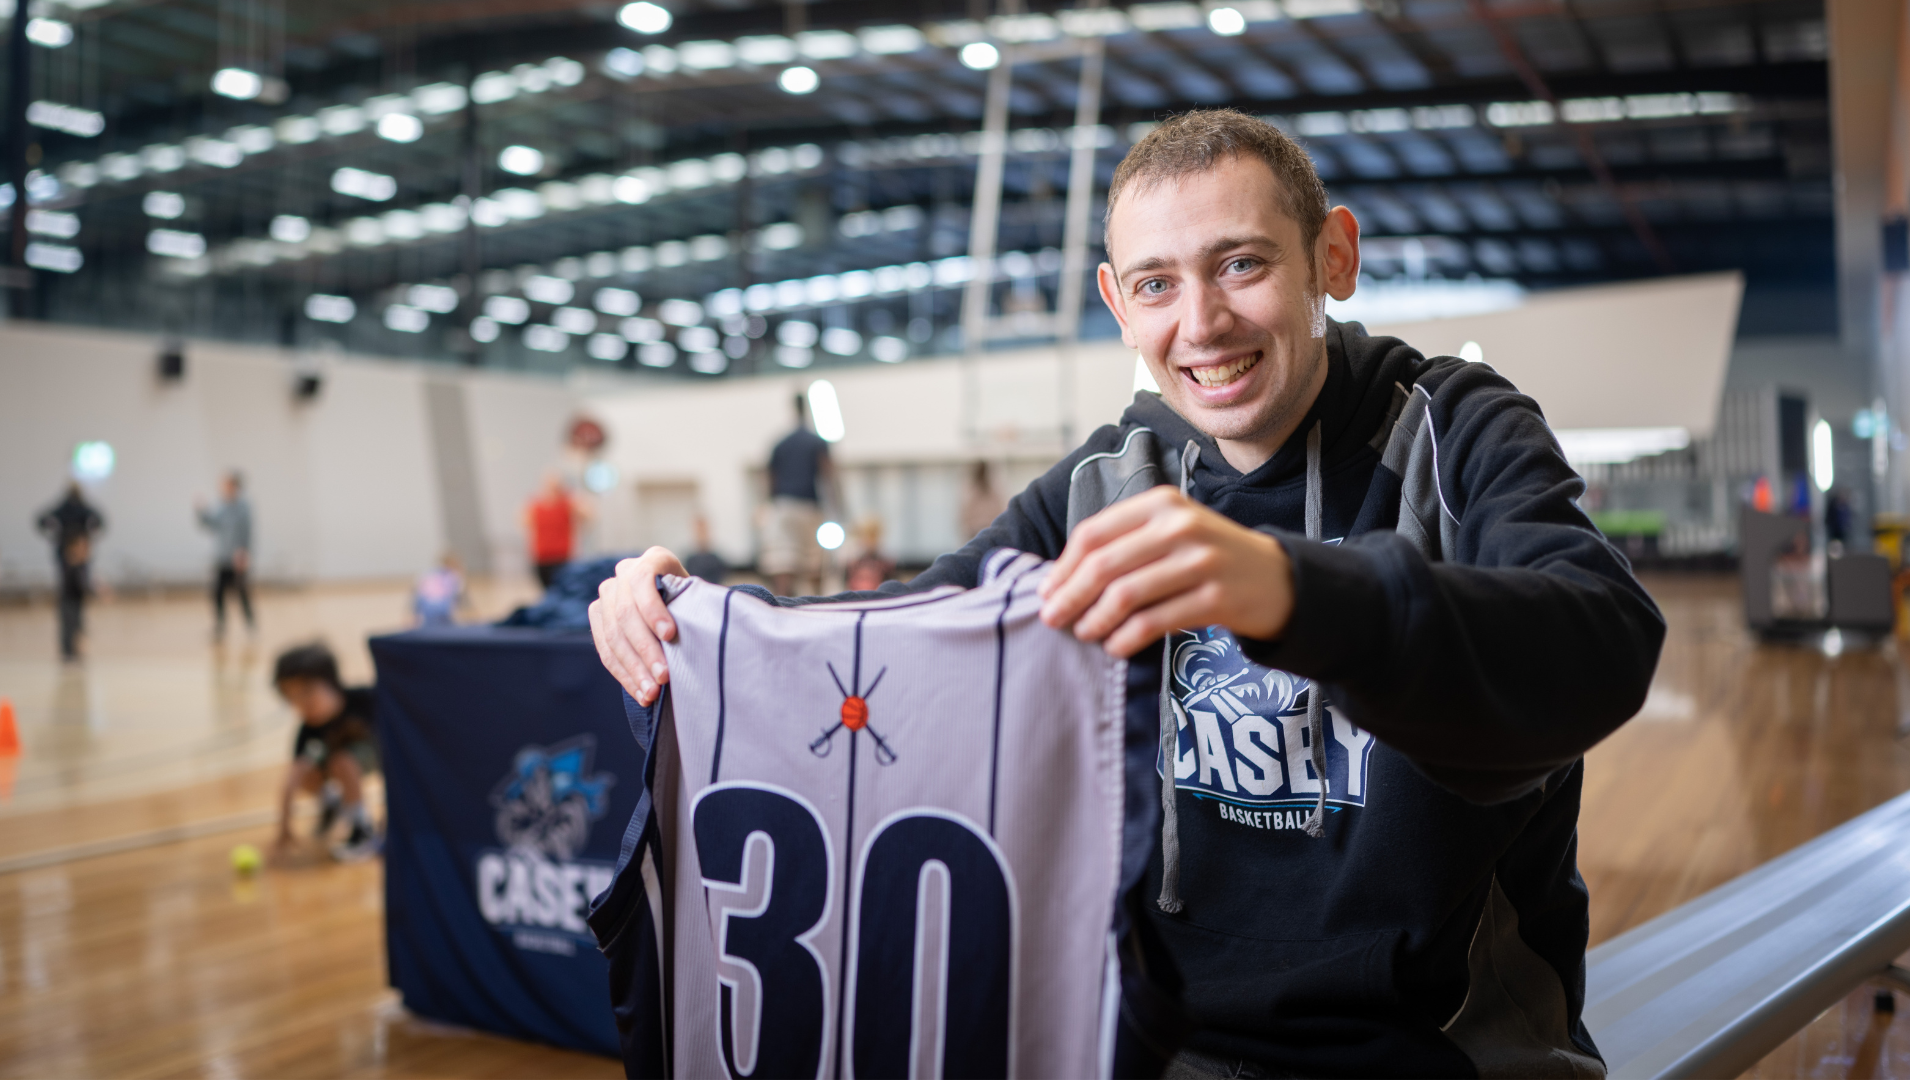 Aiden is pictured at the basketball stadium holding a jersey and smiling